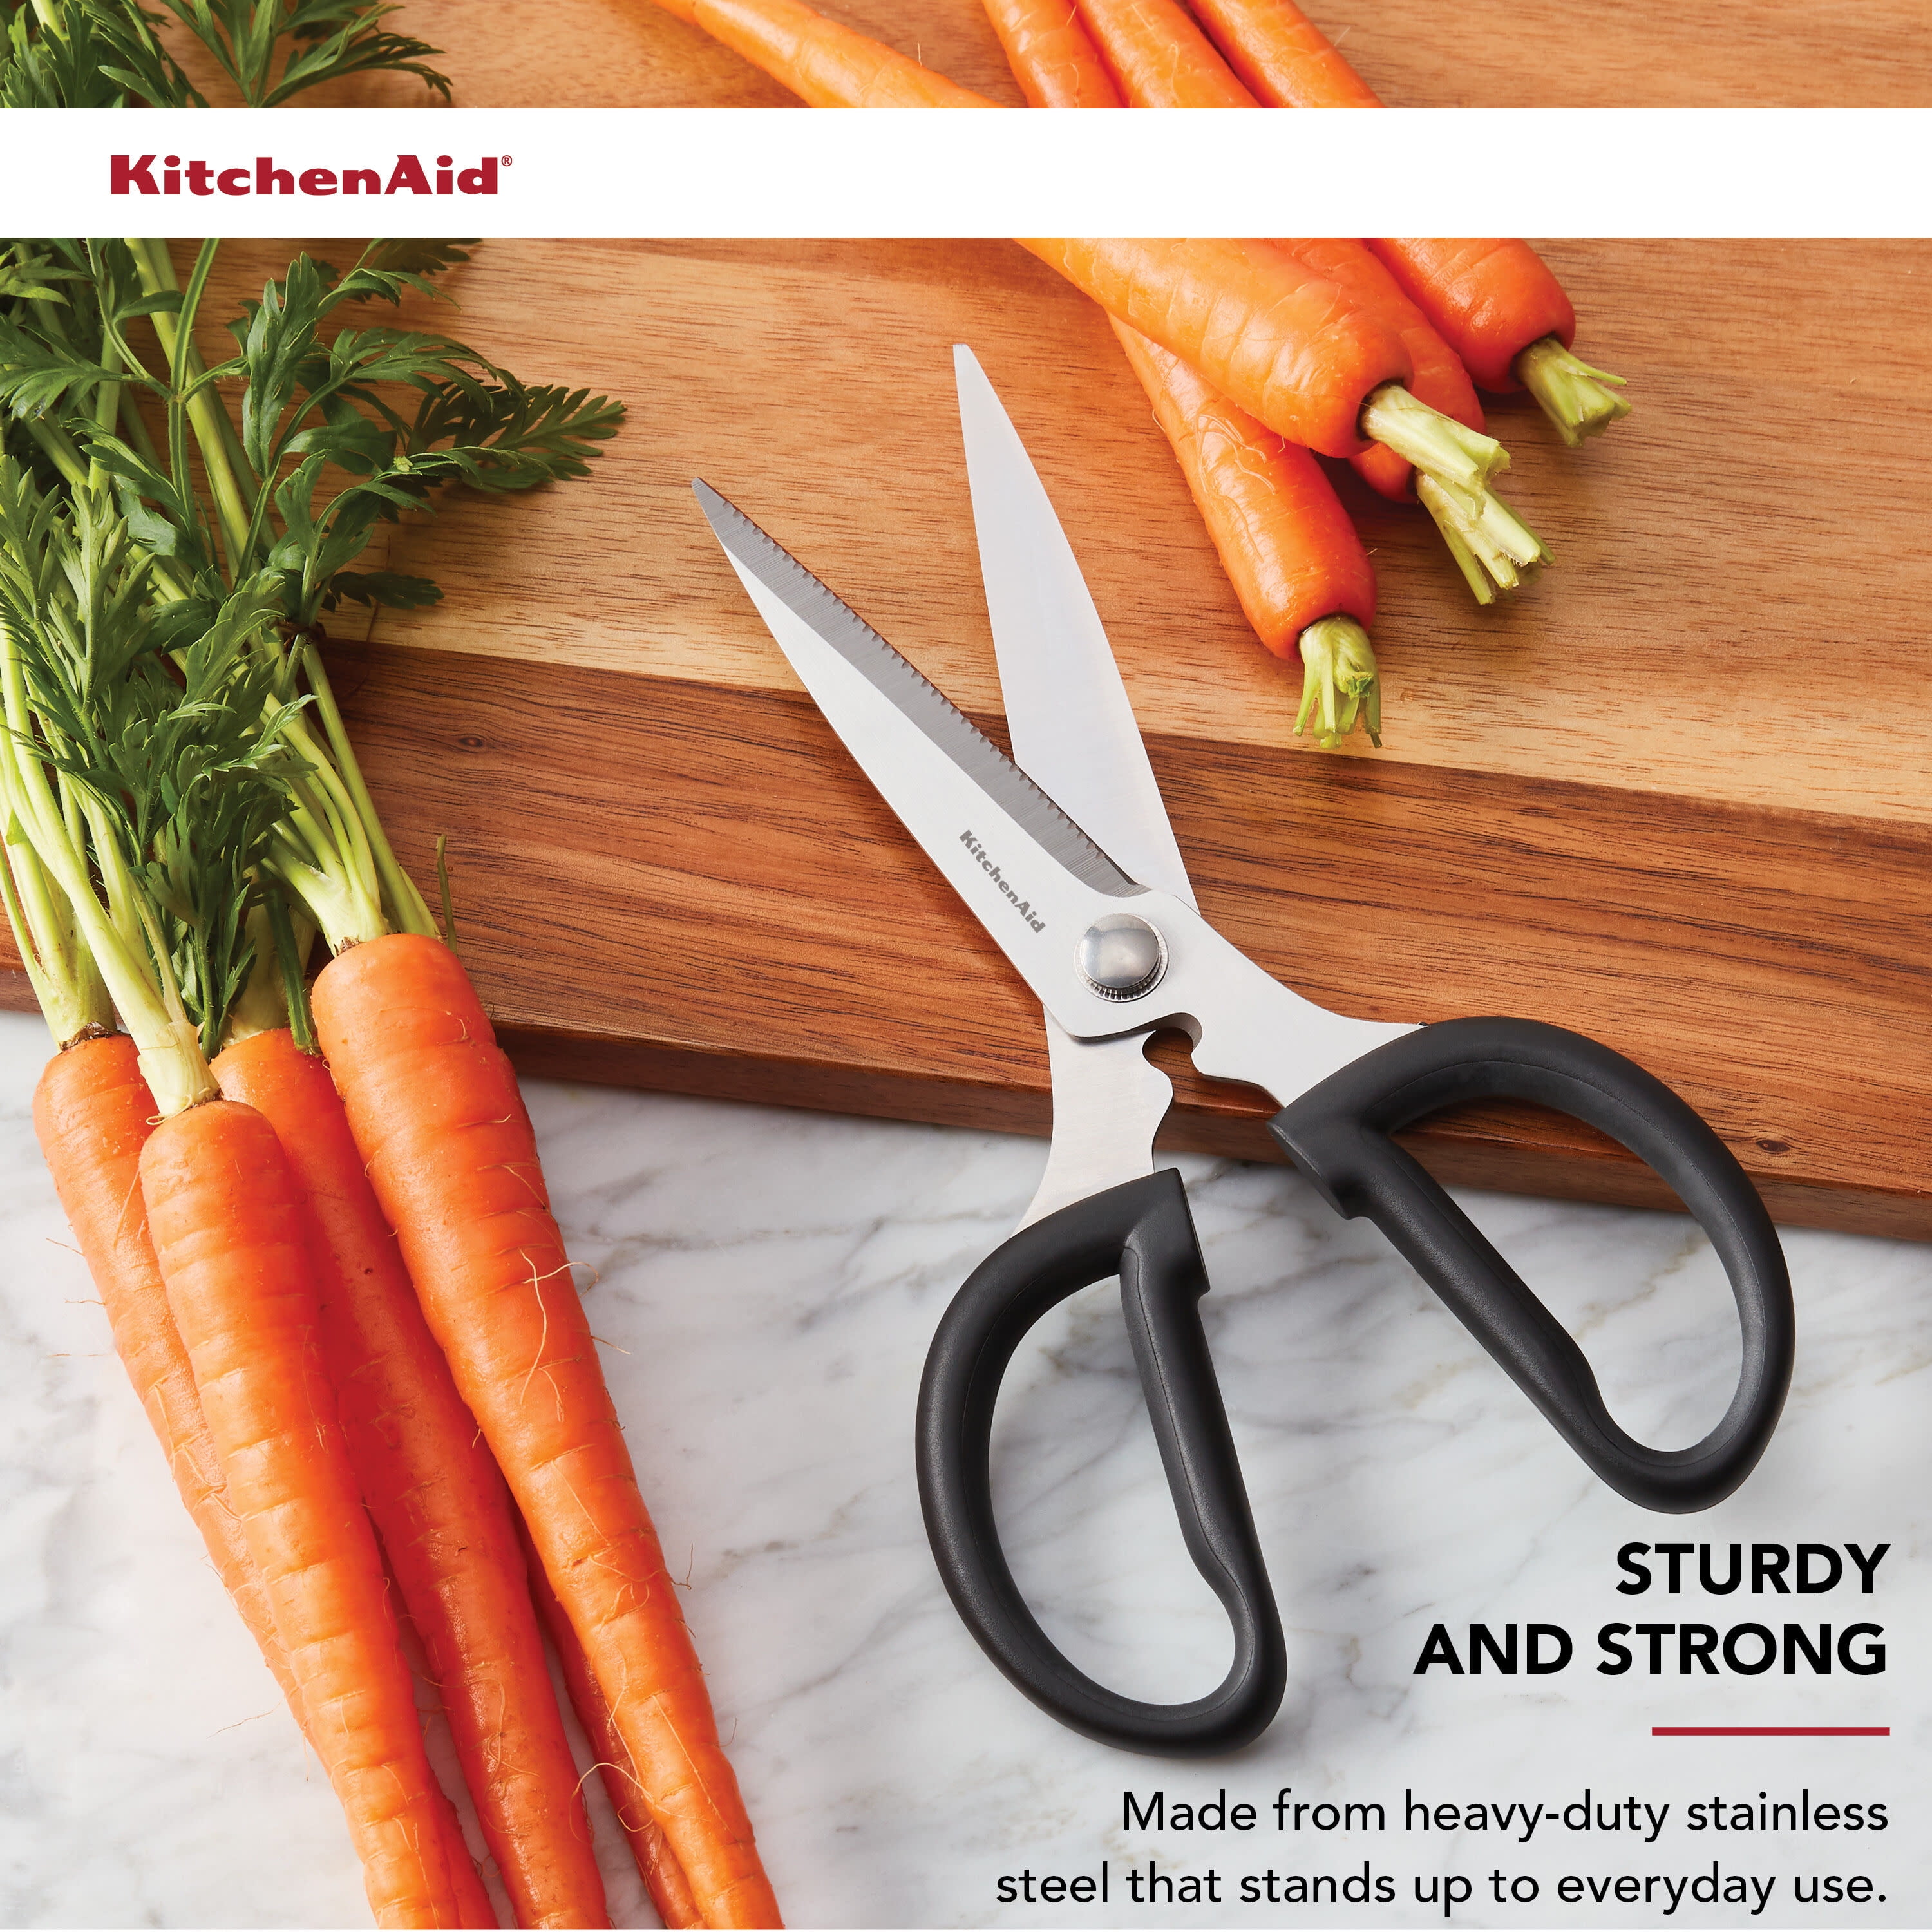  KitchenAid All Purpose Kitchen Shears with Protective Sheath  for Everyday use, Dishwasher Safe Stainless Steel Scissors with Comfort  Grip, 8.72-Inch, Black: Home & Kitchen